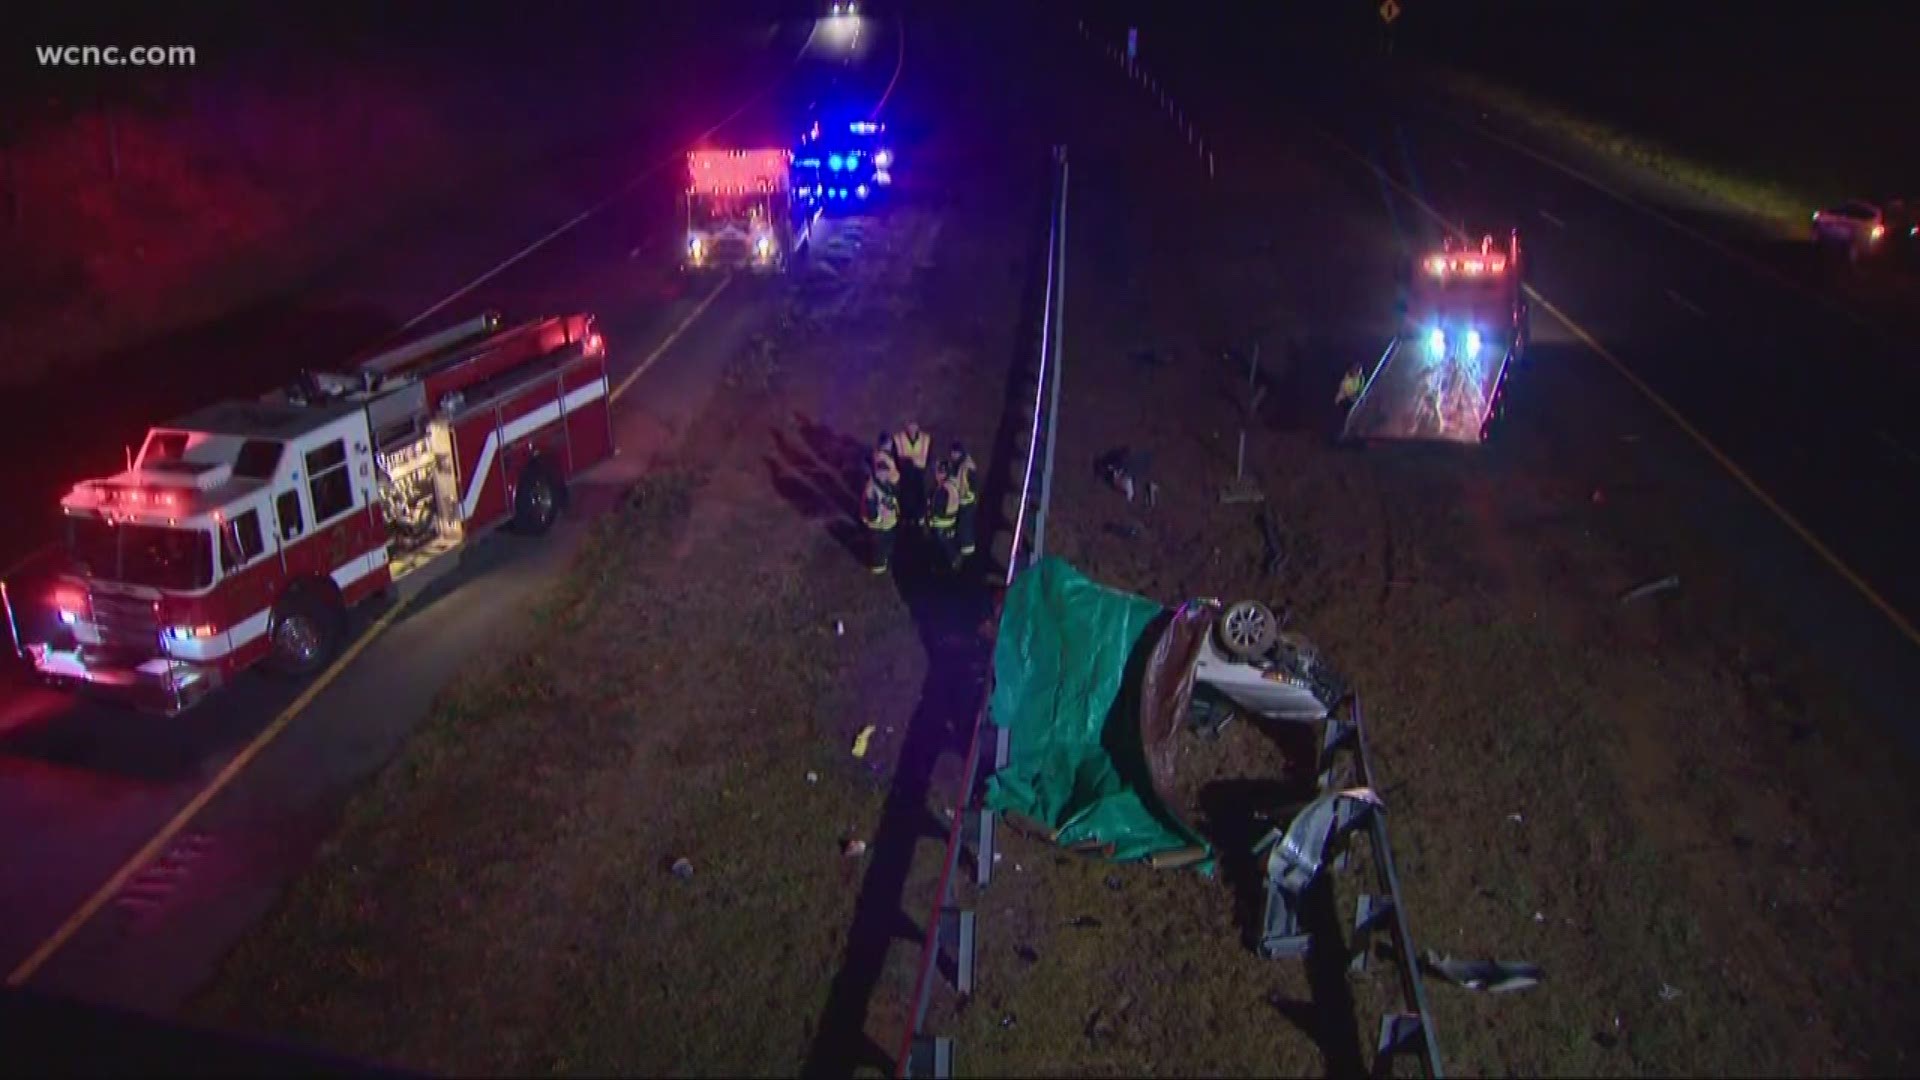 One lane of I-485 was shut down for several hours after a deadly crash near Lawyers Road Monday morning.